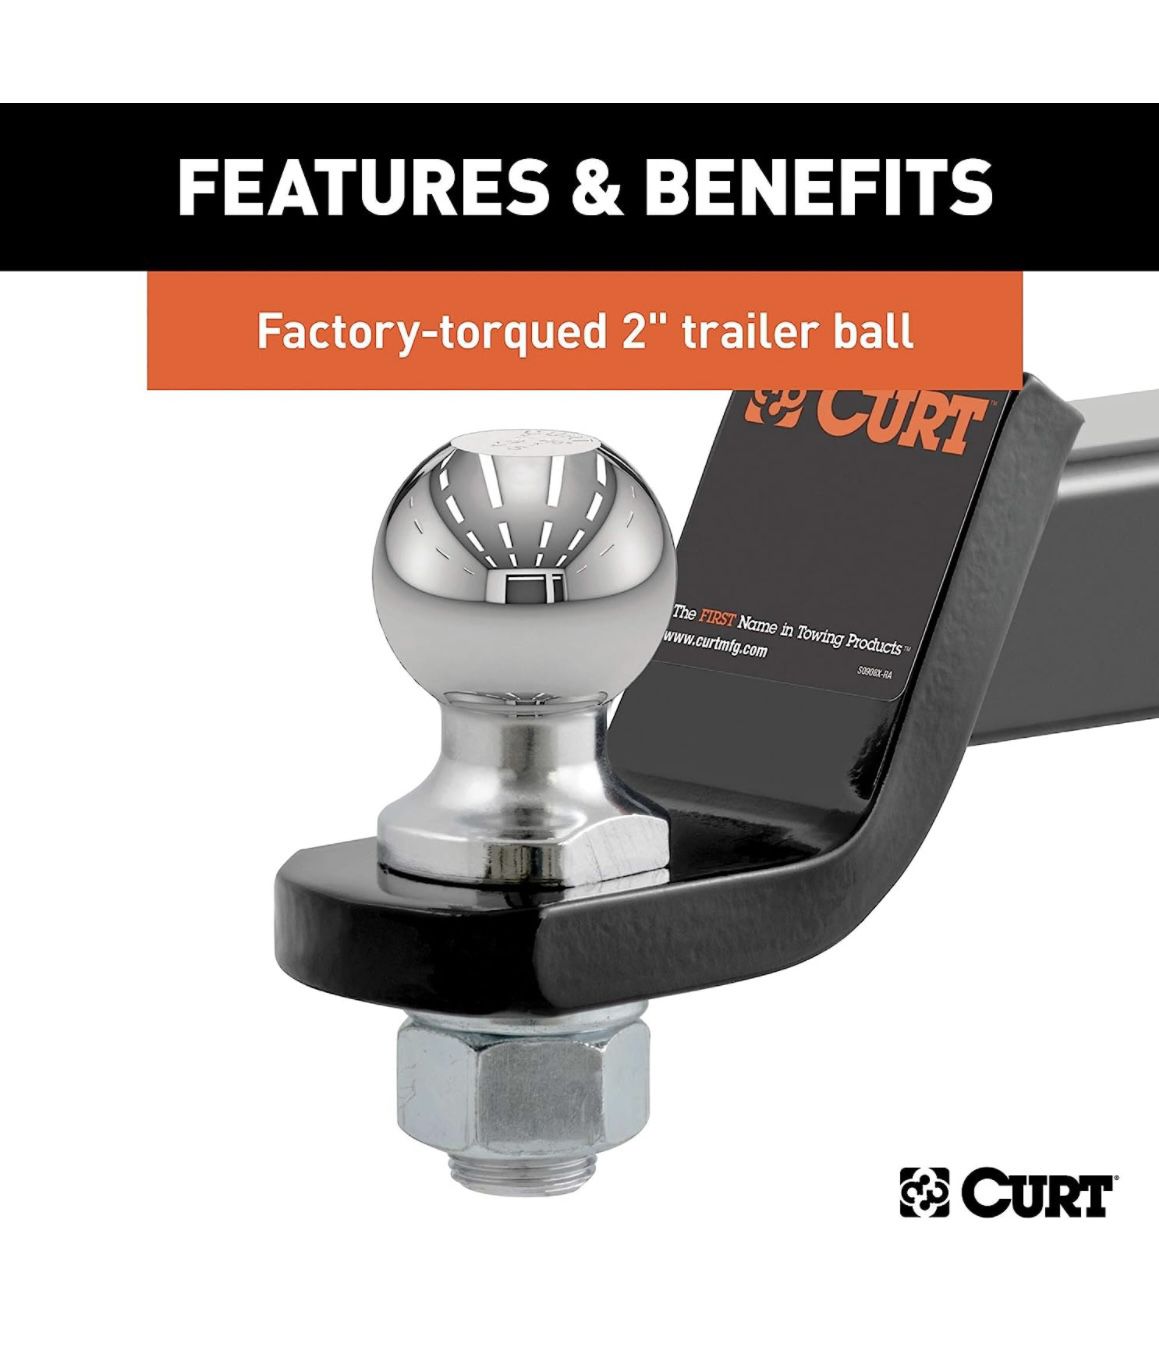 CURT 45036 Trailer Hitch Mount with 2-Inch Ball & Pin, Fits 2-in Receiver, 7,500 lbs, 2" Drop, GLOSS BLACK POWDER COAT